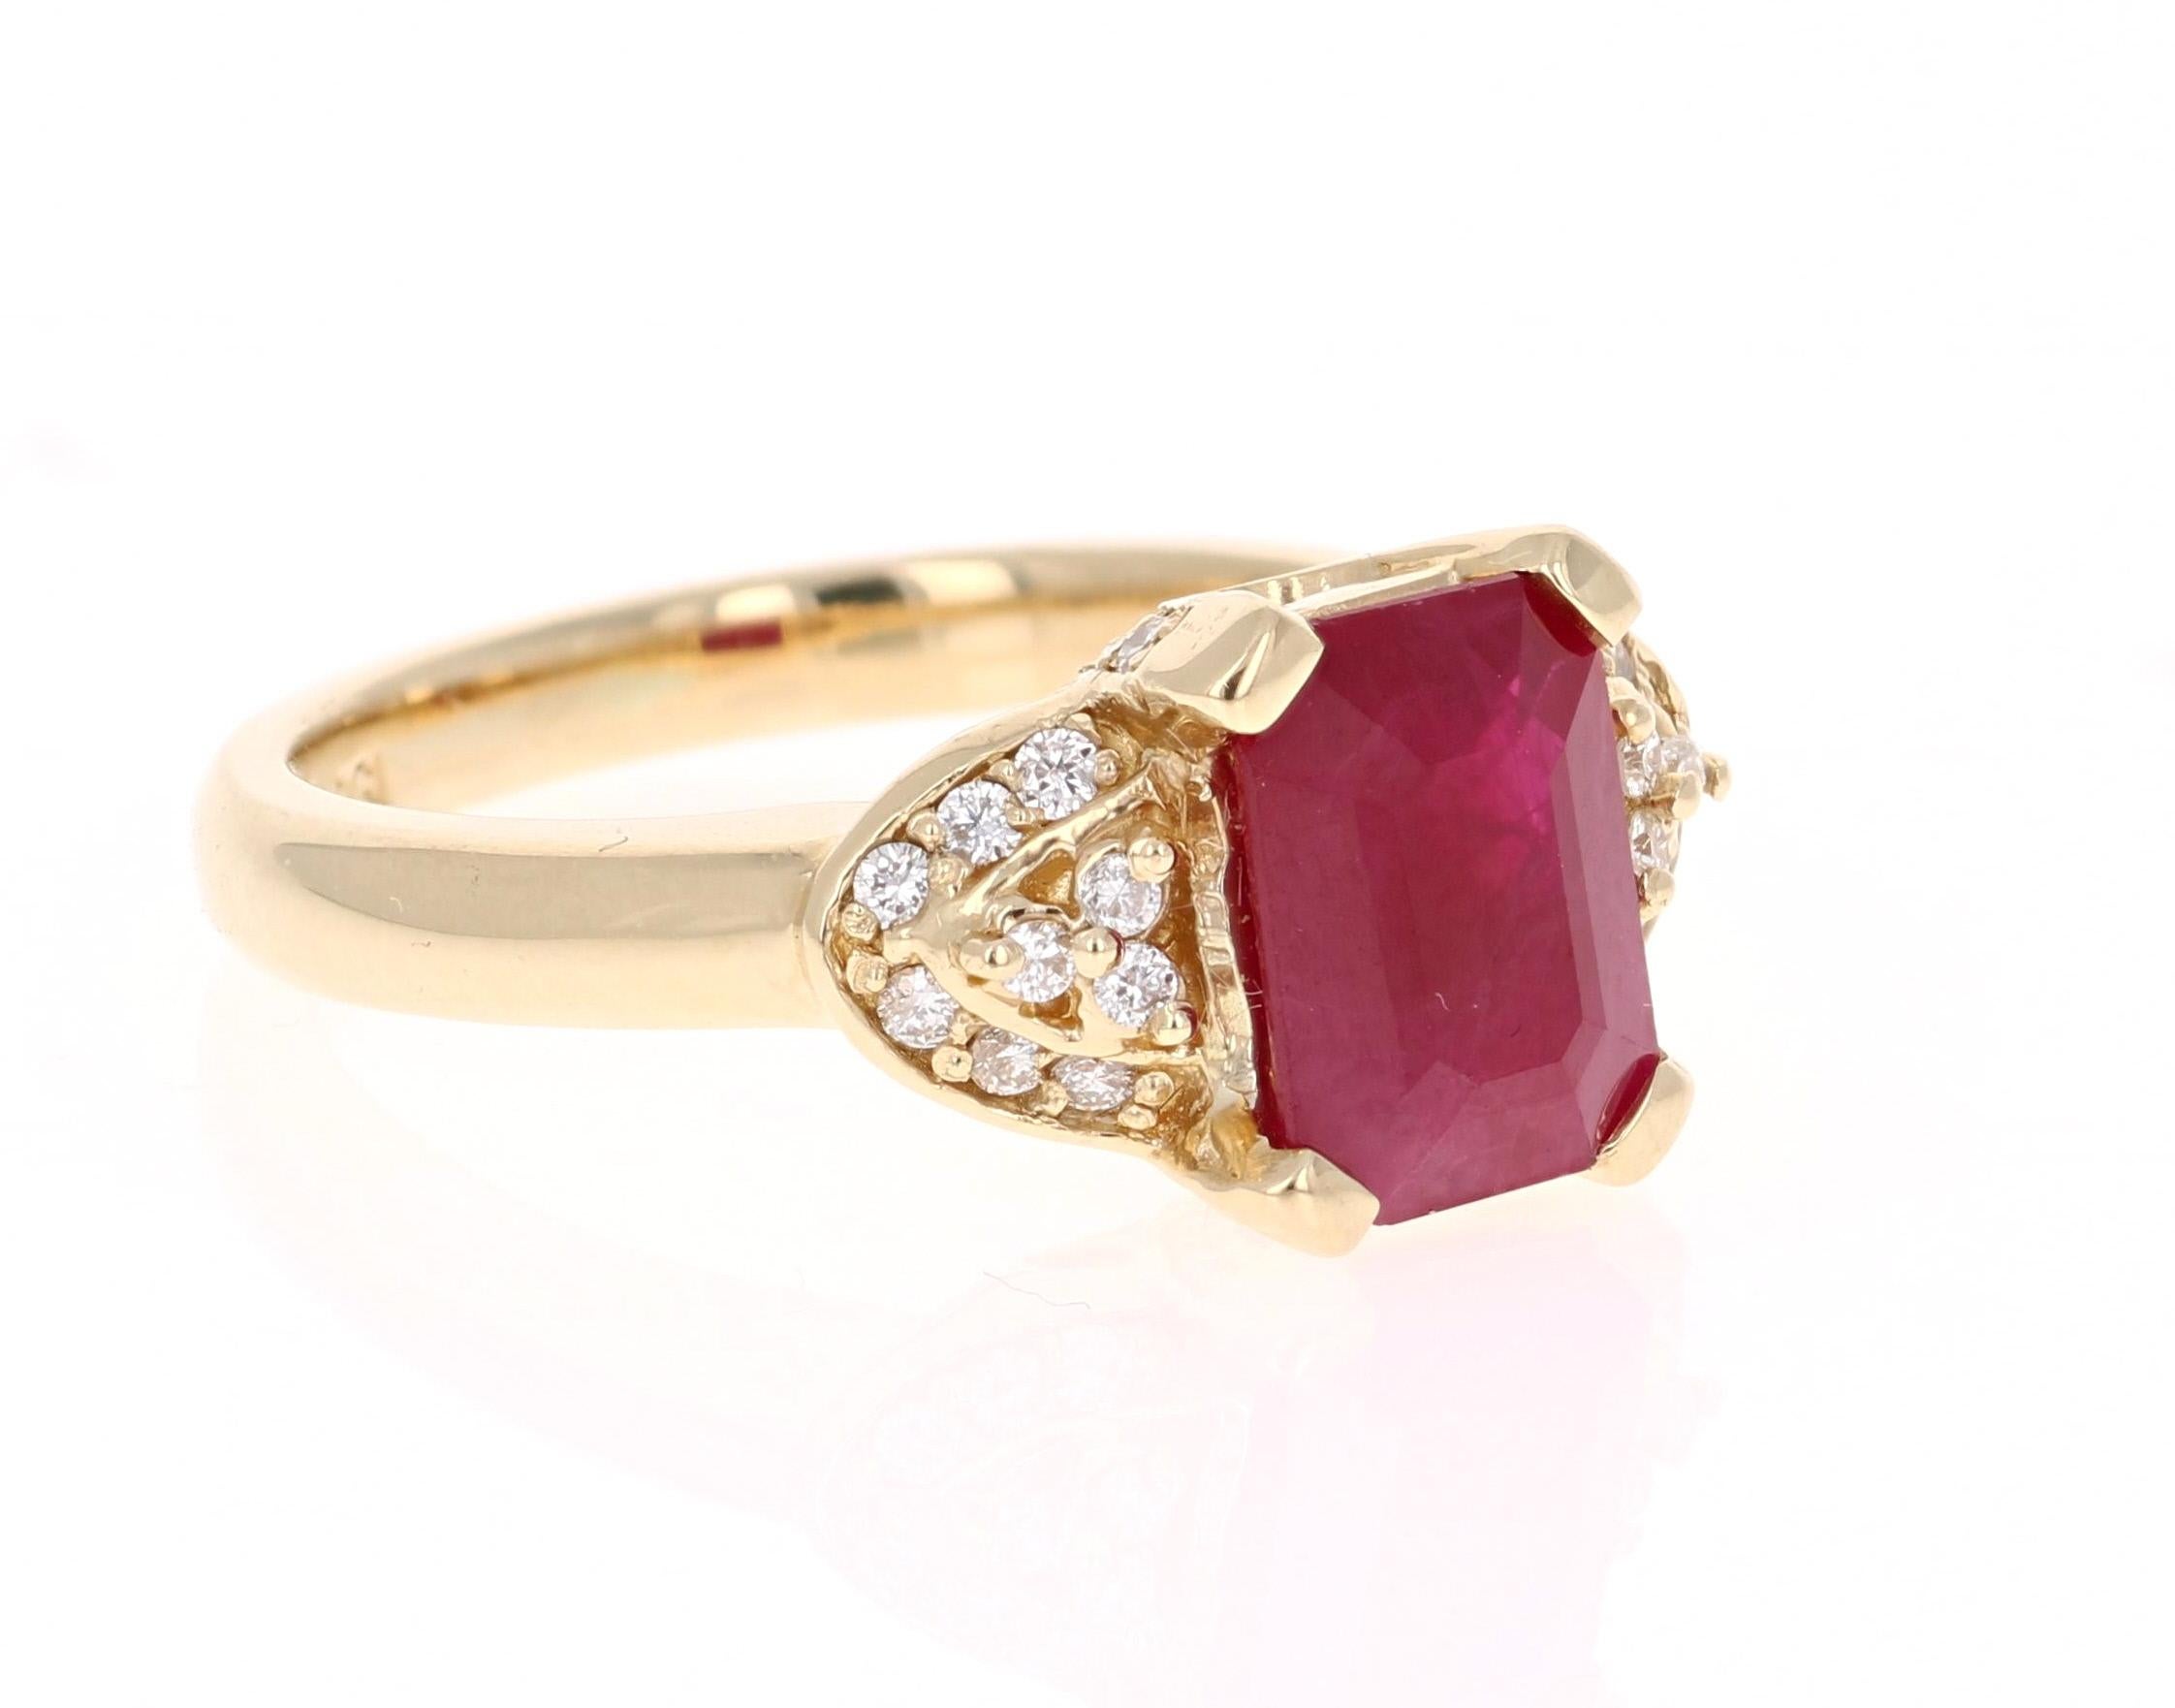 This elegant and dainty Ruby & Diamond Ring can be a modern Engagement/Promise ring. It has a Emerald Cut Ruby that is 2.55 carats with a cluster of 32 Round Cut Diamonds weighing 0.31 carats. The total carat weight of the ring is 2.86 Carats. It is